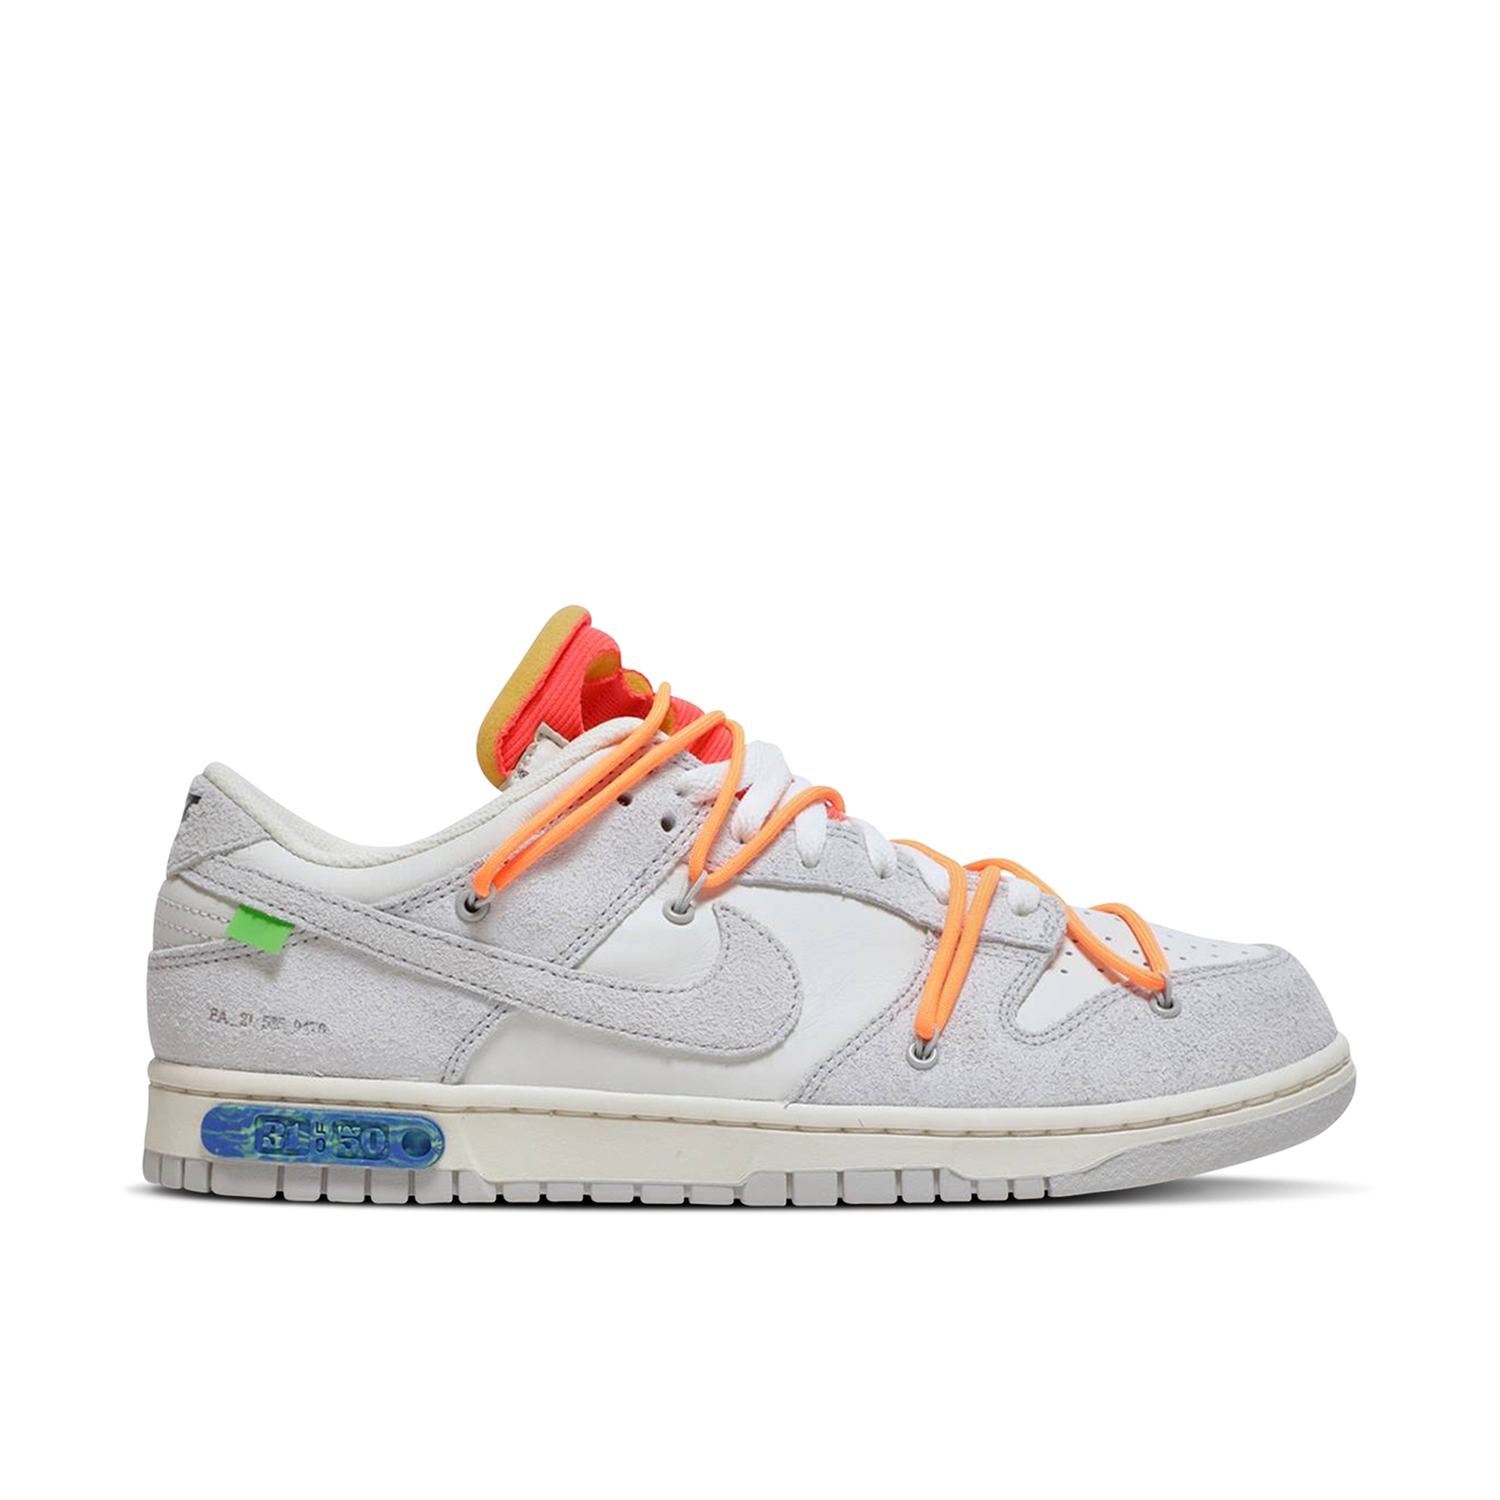 Off White Nike Dunks | Laced